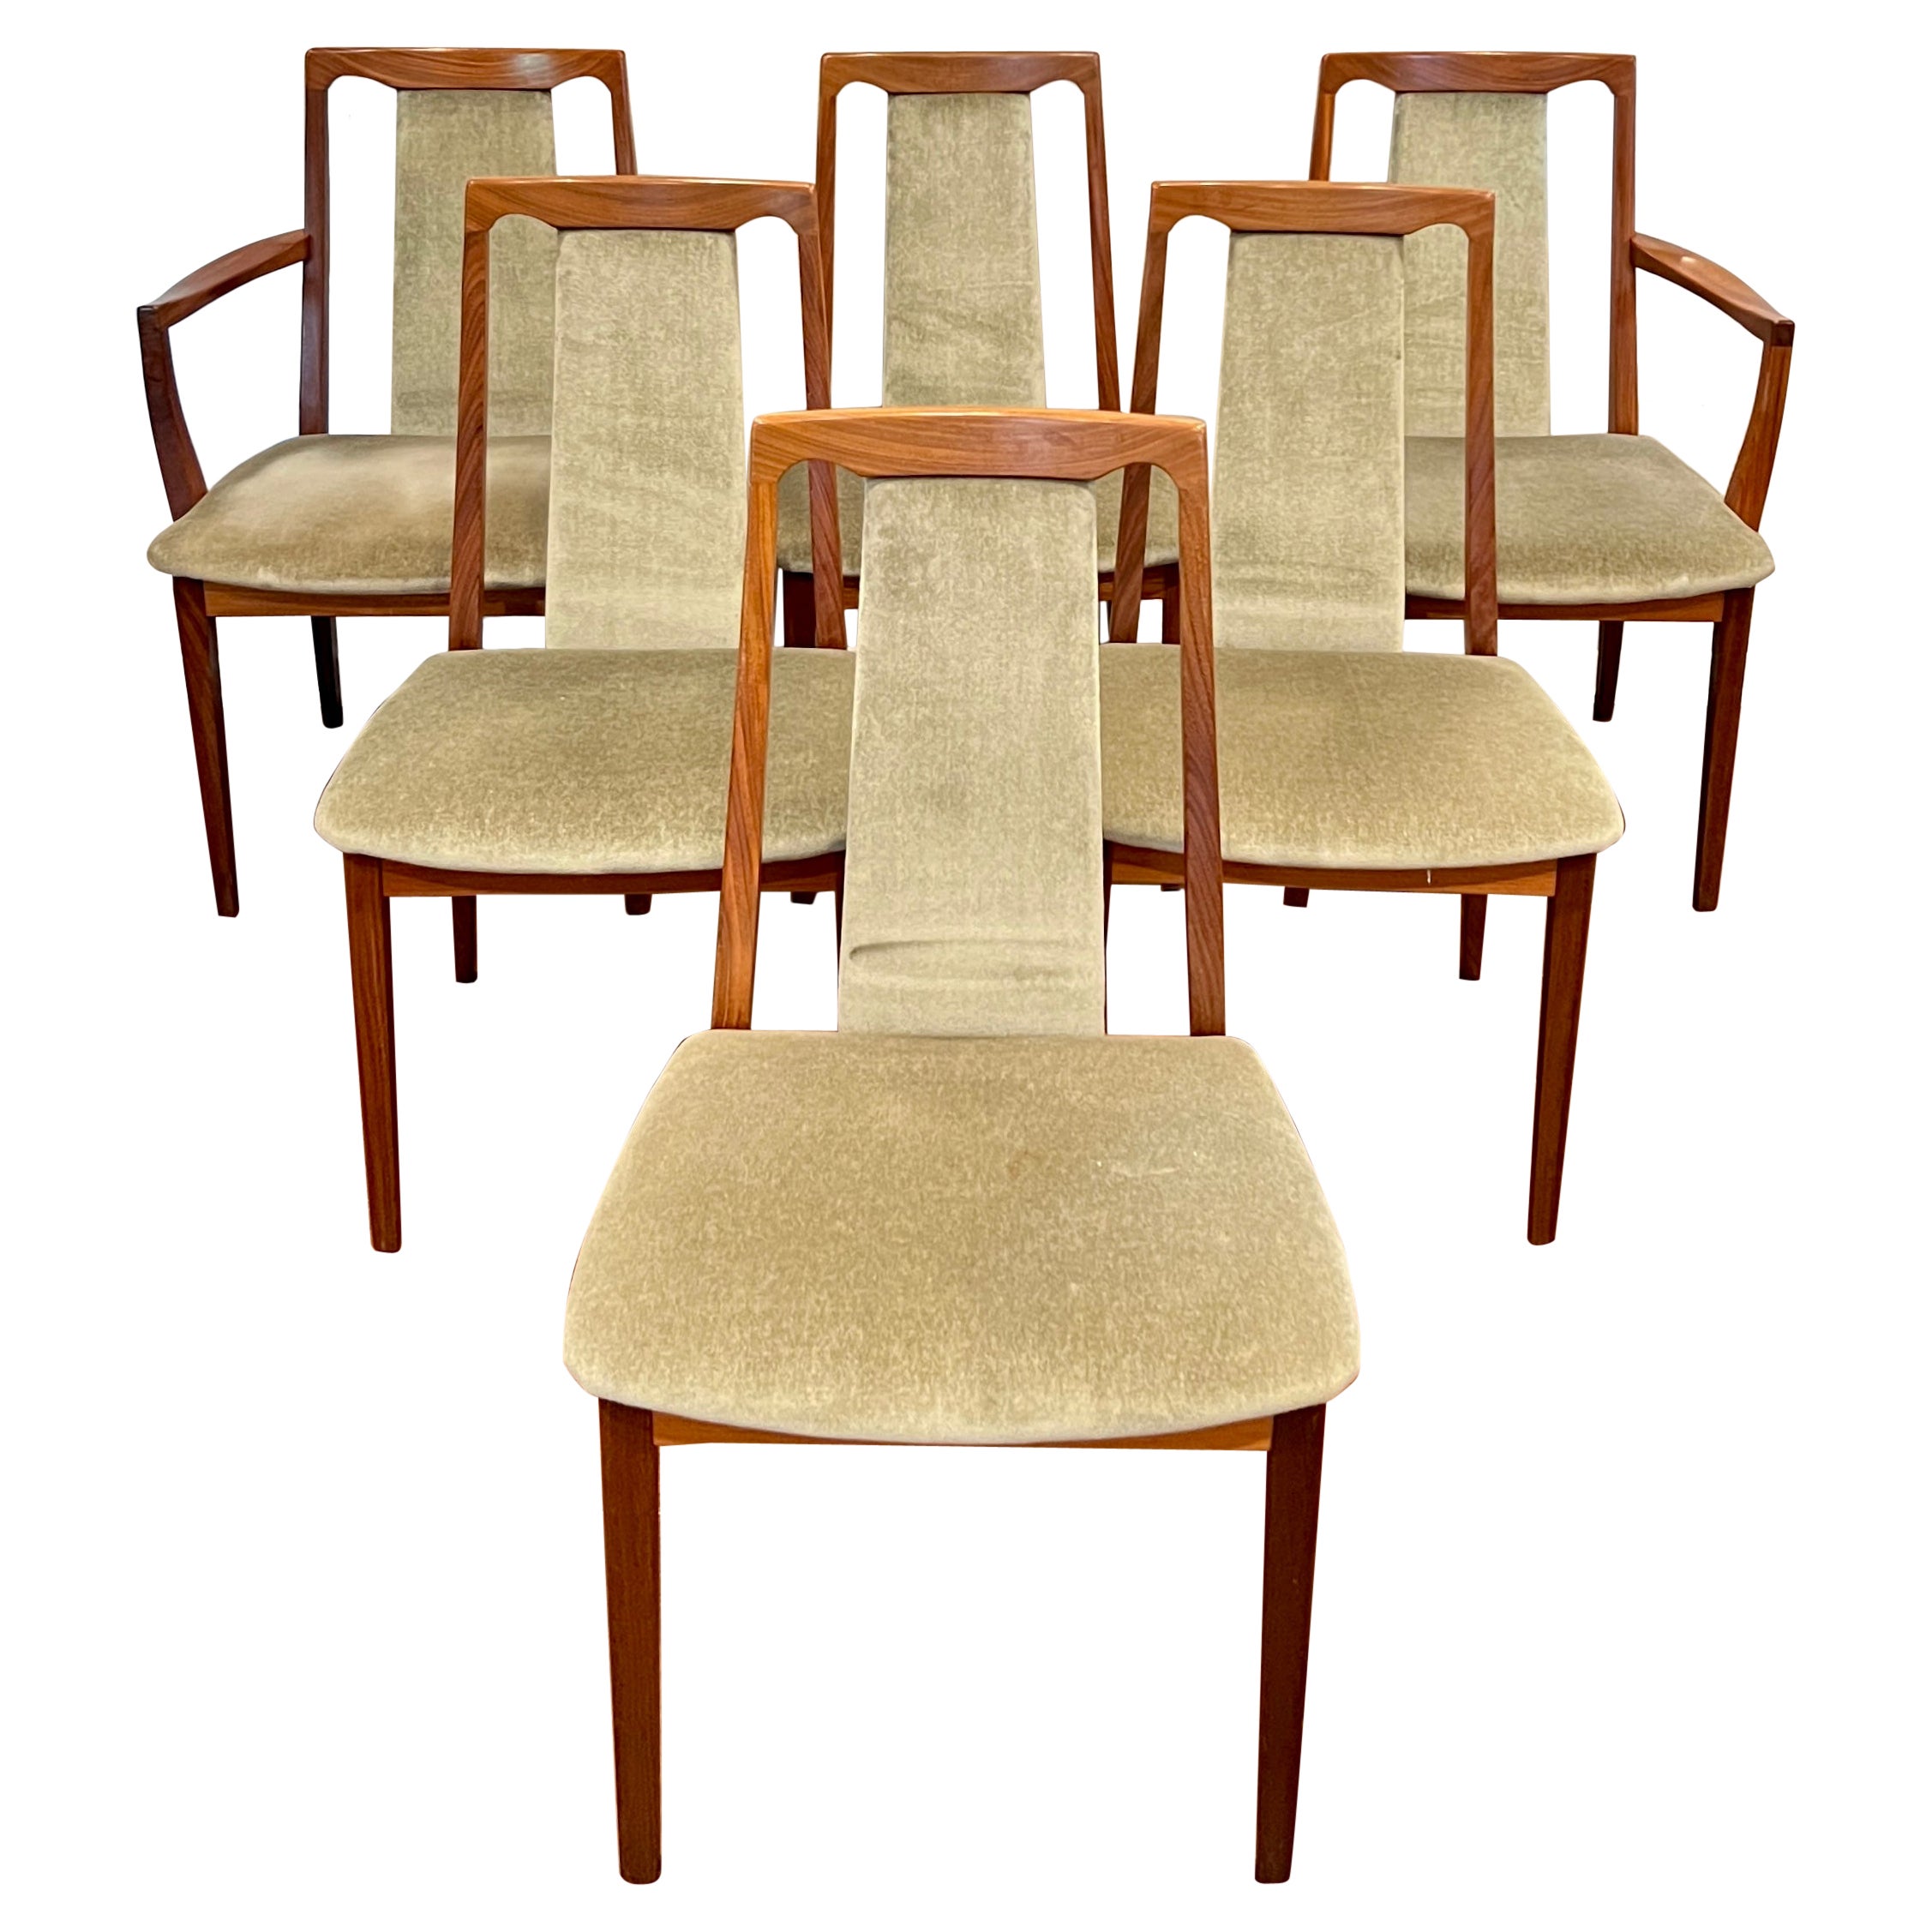 A set of 6 mid century modern style dining chairs by G plan, circa 1980s